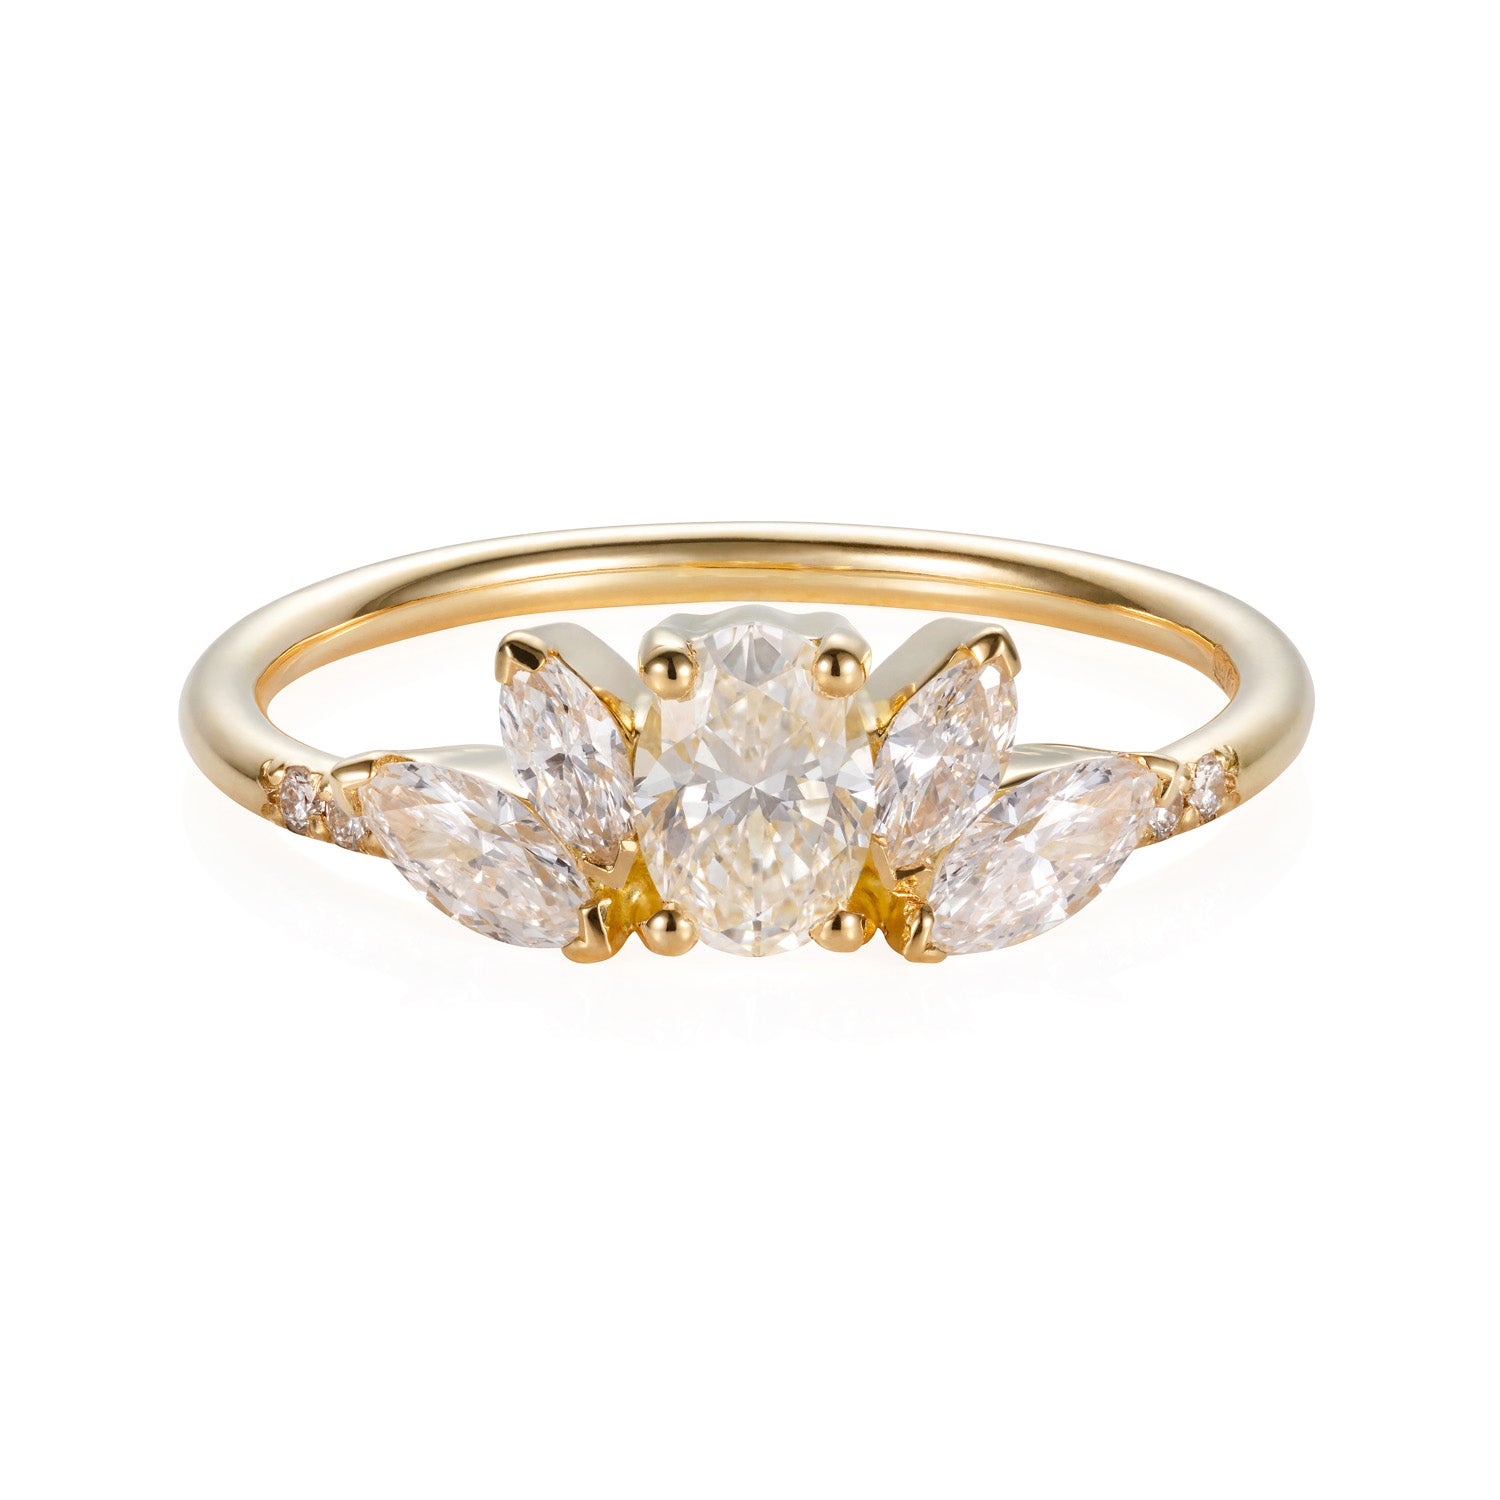 Sweet Pea 18ct yellow gold Tiara engagement ring with oval diamond and 2 marquise diamonds either side and diamonds set in the band.